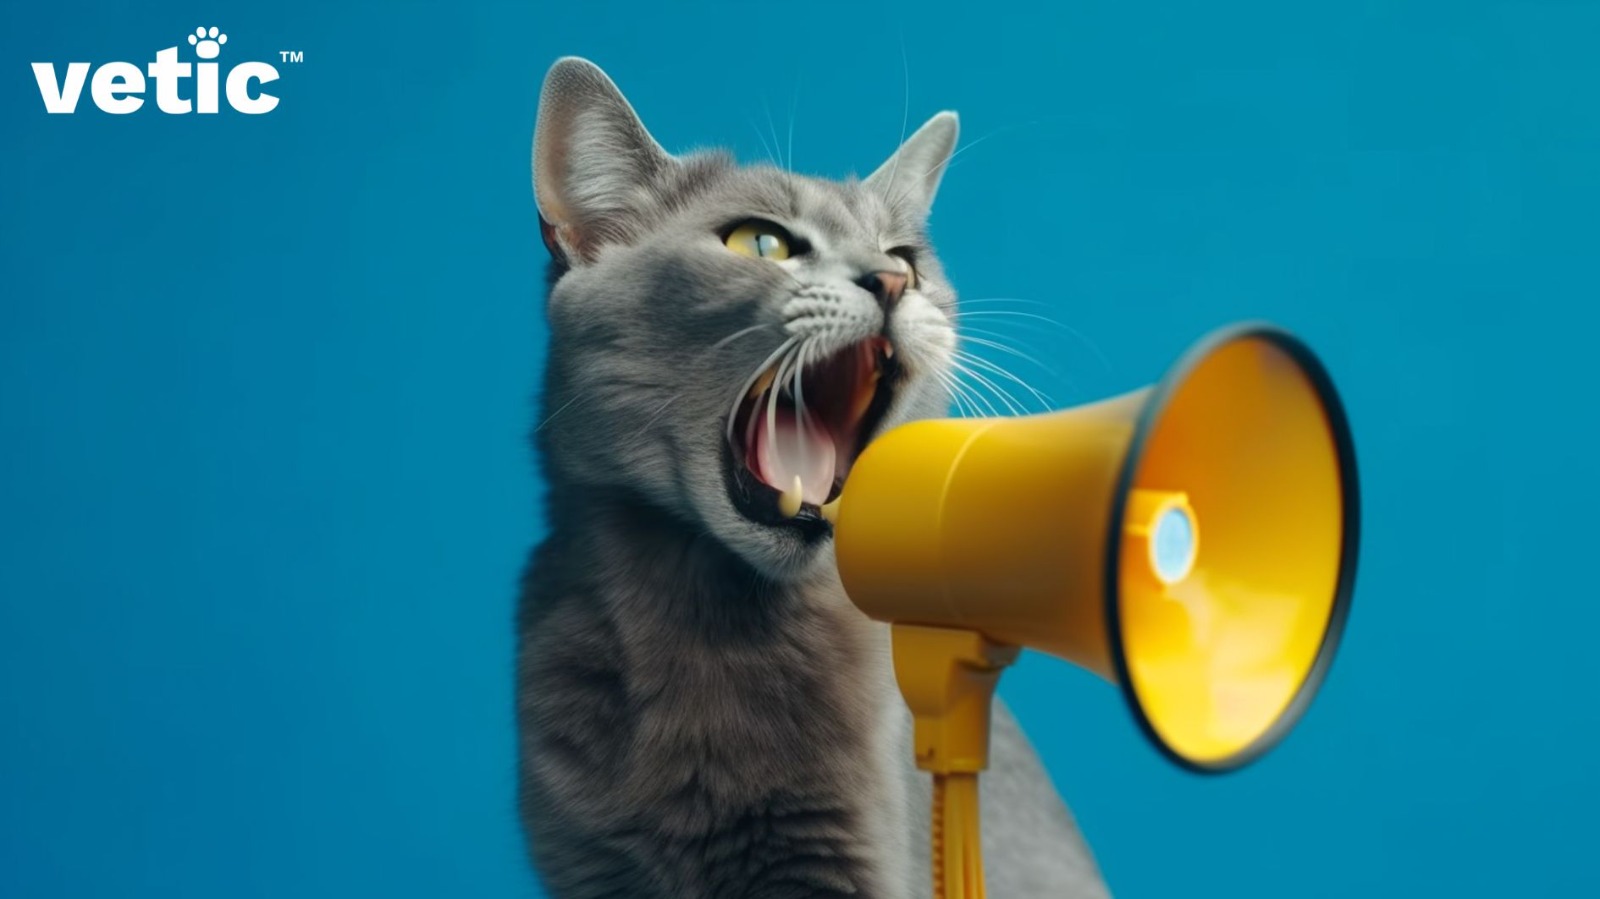 Photo of a grey short hair cat yelling into a yellow hand-held speaker. A cat in heat will often vocalise loudly and frequently.